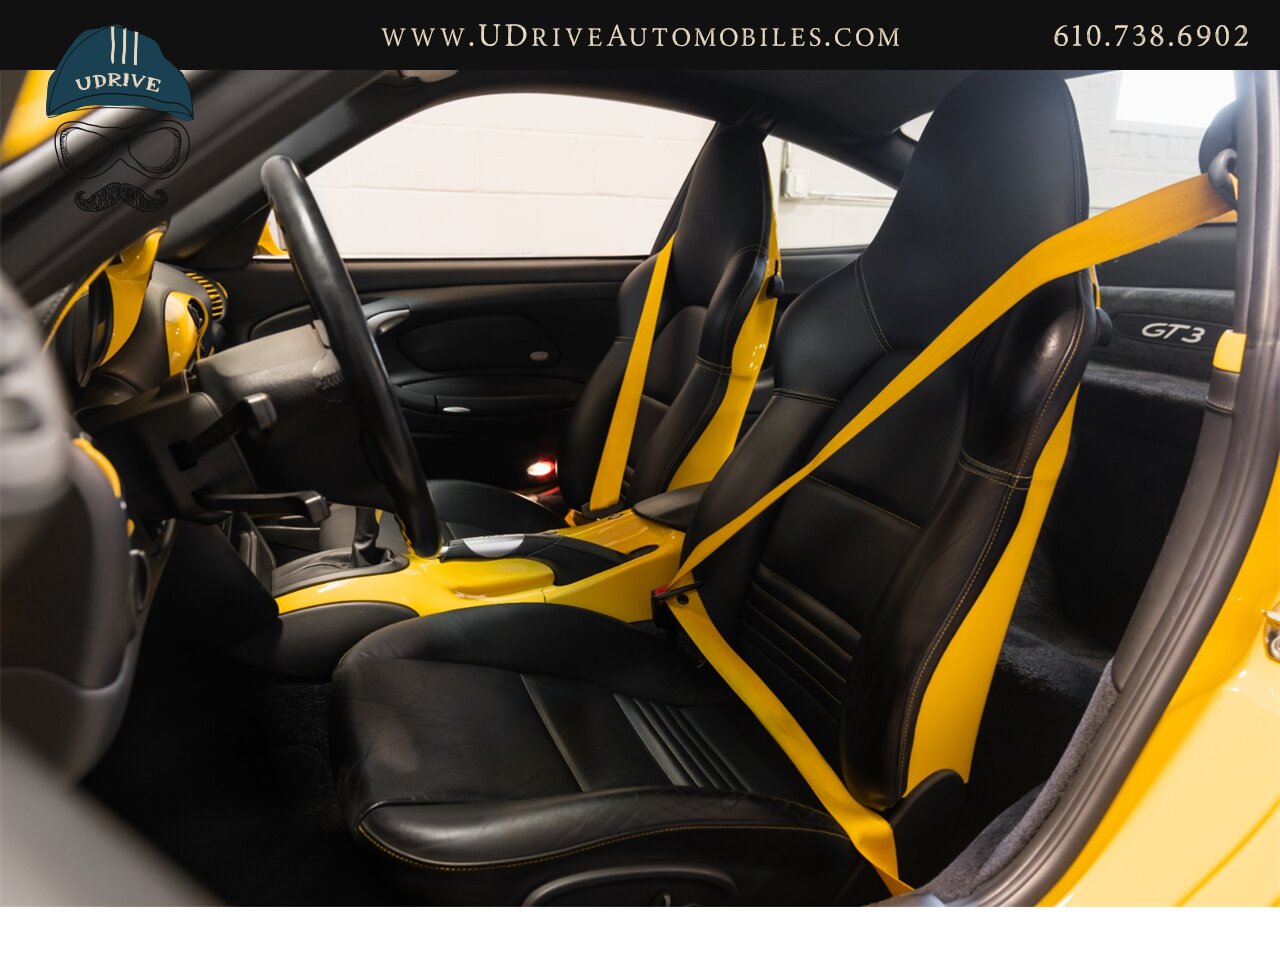 2005 Porsche 911 GT3 996 Speed Yellow Sport Seats Pntd Hardbacks  Pntd Console Deviating Stitch Yellow Accents Throughout - Photo 30 - West Chester, PA 19382